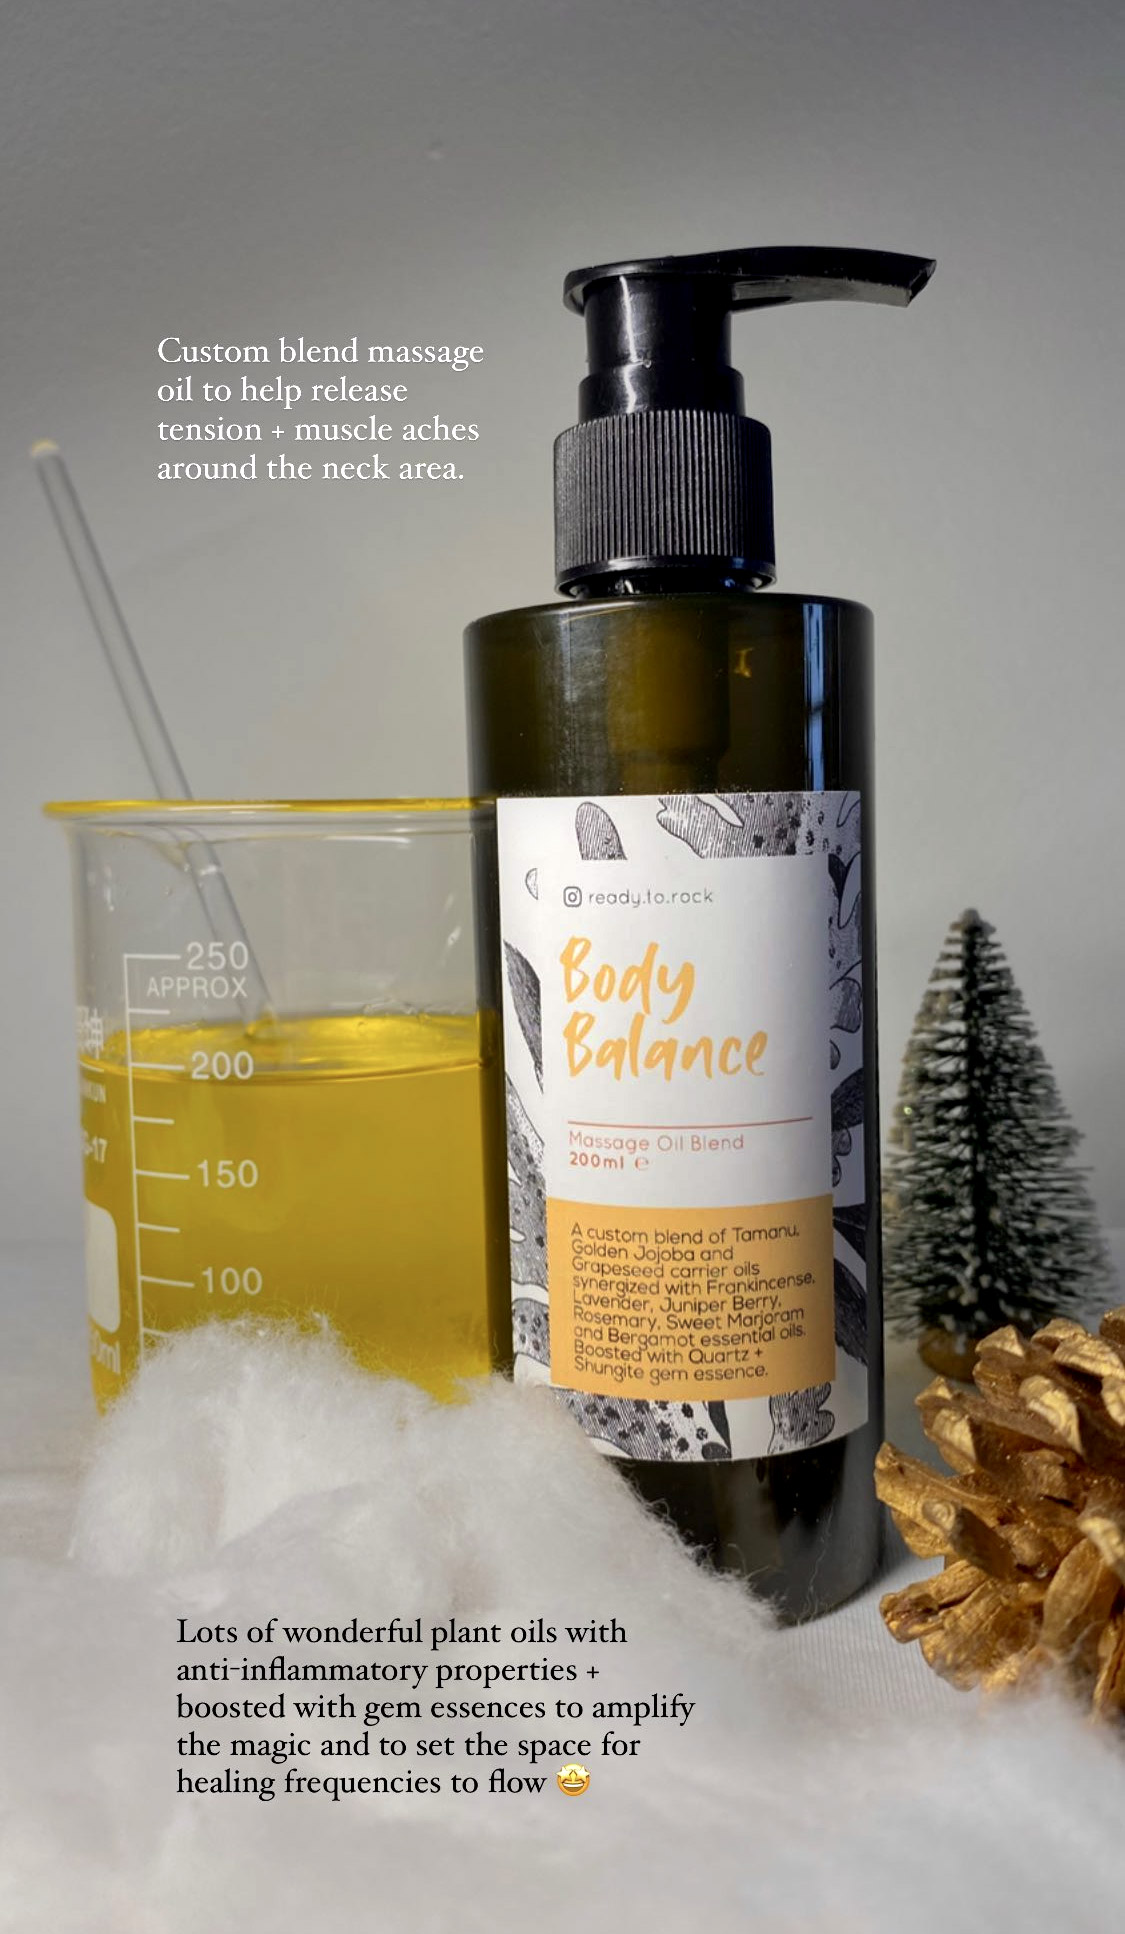 Custom Aromatherapy Blend by BOTICA natural remedies, based in Kuala Lumpur